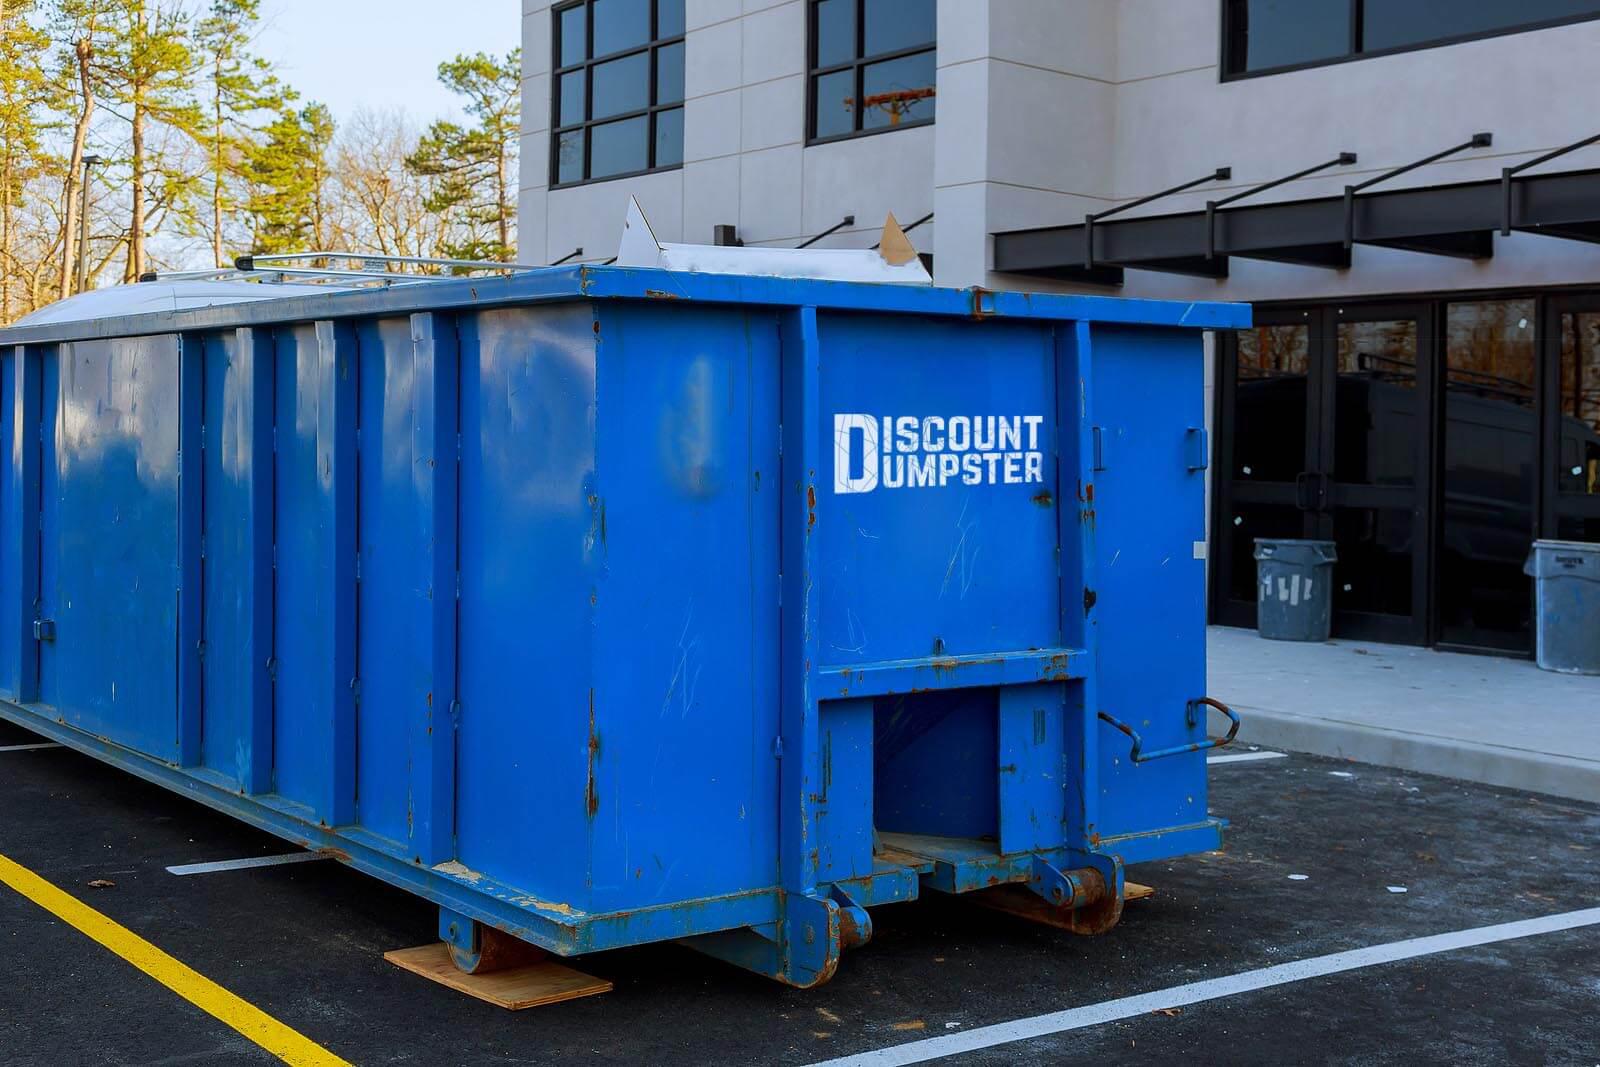 Discount dumpster has quality roll off dumpsters in chicago il for your home or commercial needs